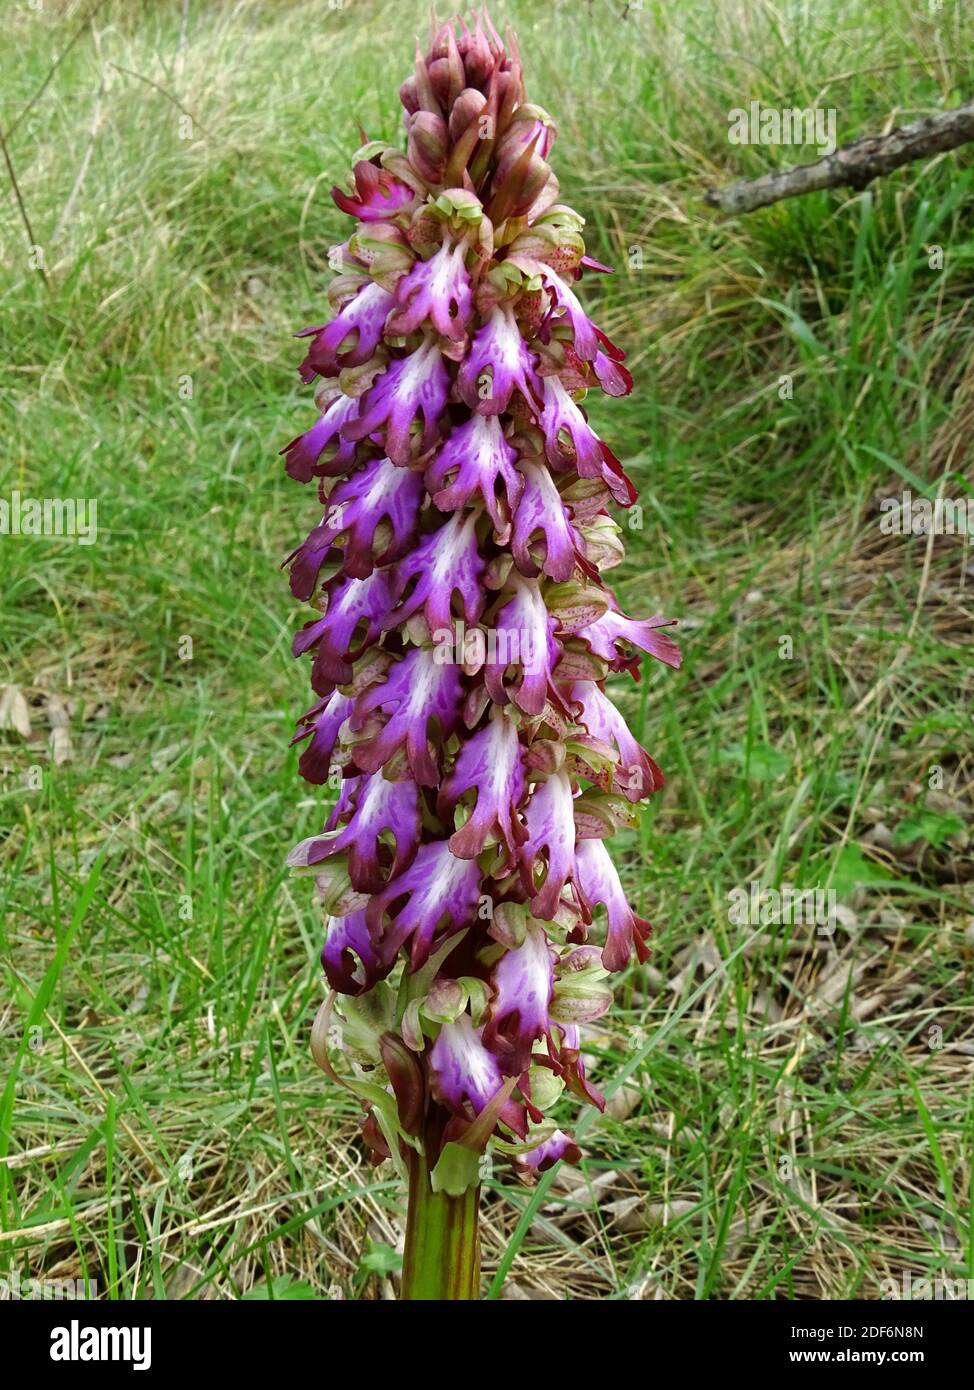 Giant orchid (Himantoglossum robertianum or Barlia robertiana) is a terrestrial orchid native to Mediterranean region. This photo was taken in Alt Stock Photo